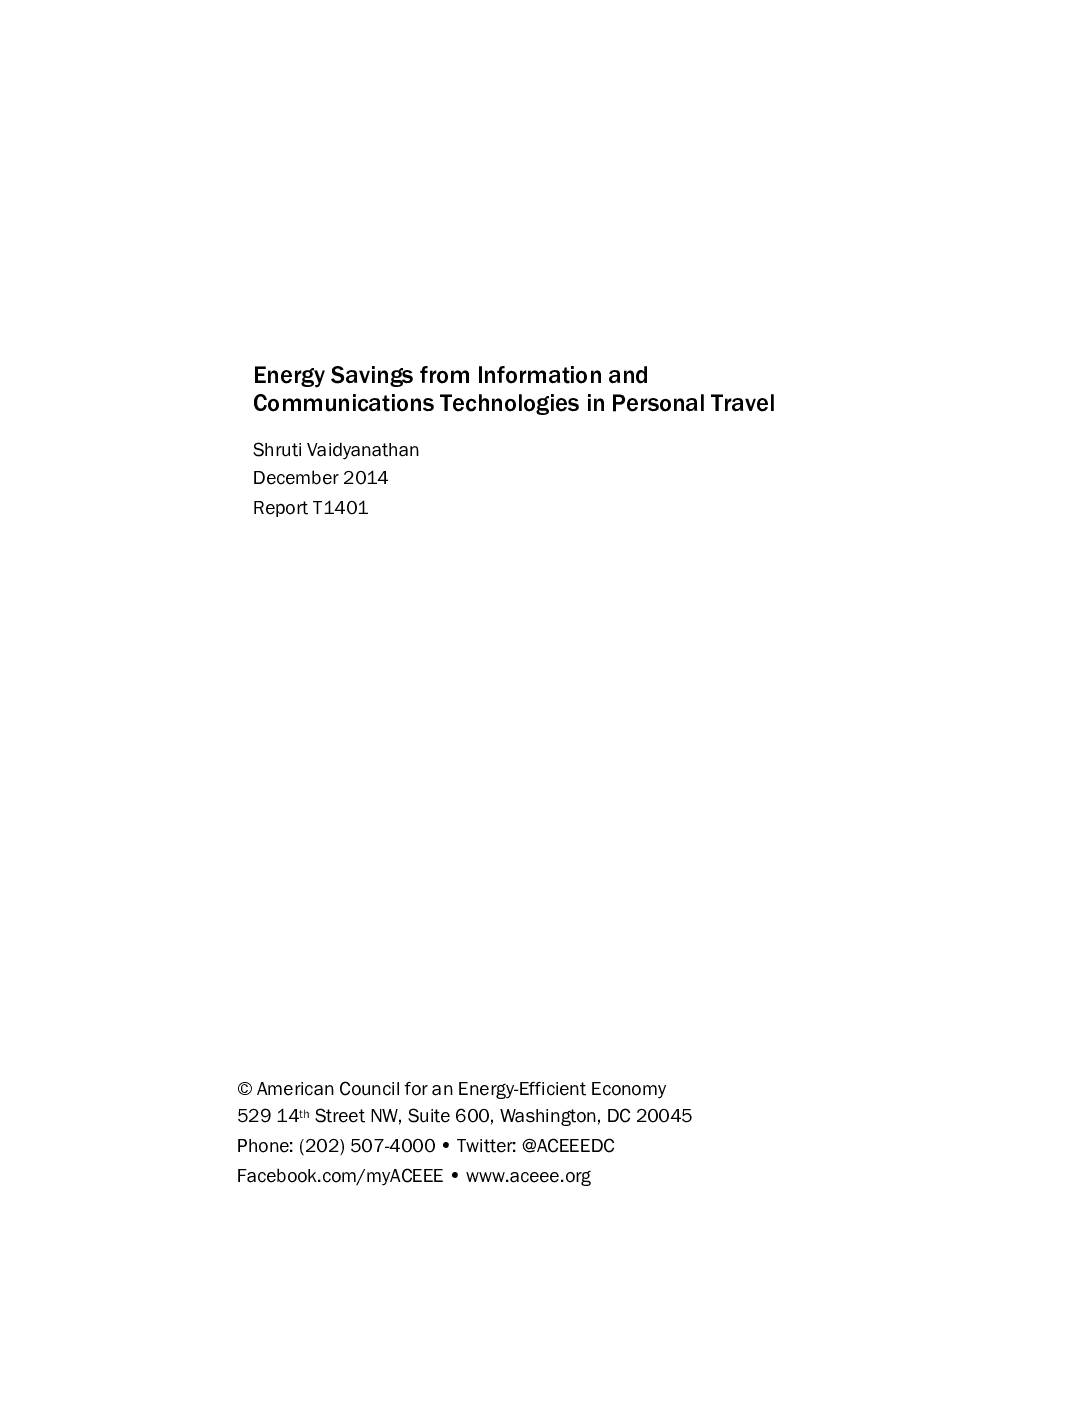 Energy Savings from Information and Communications Technologies in Personal Travel